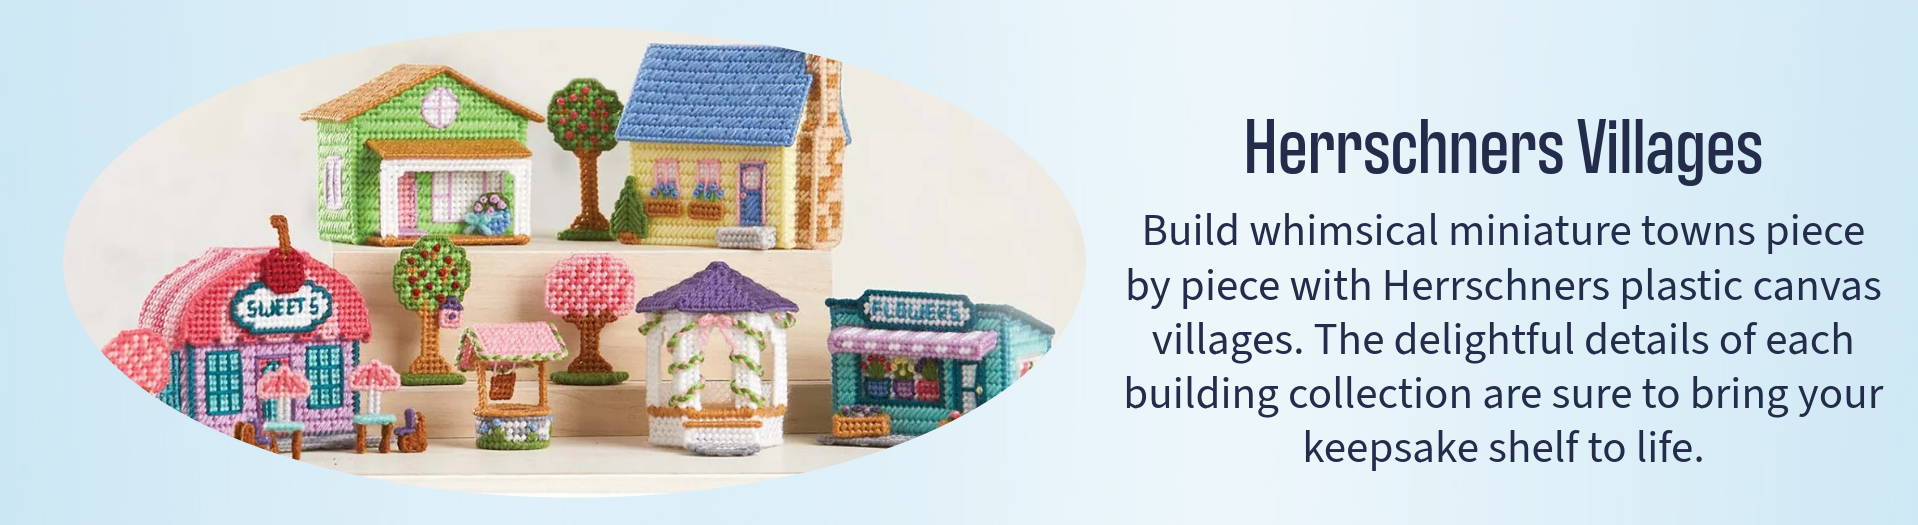 Herrschners Villages (shown in image). Build whimsical mini towns with delightful details.